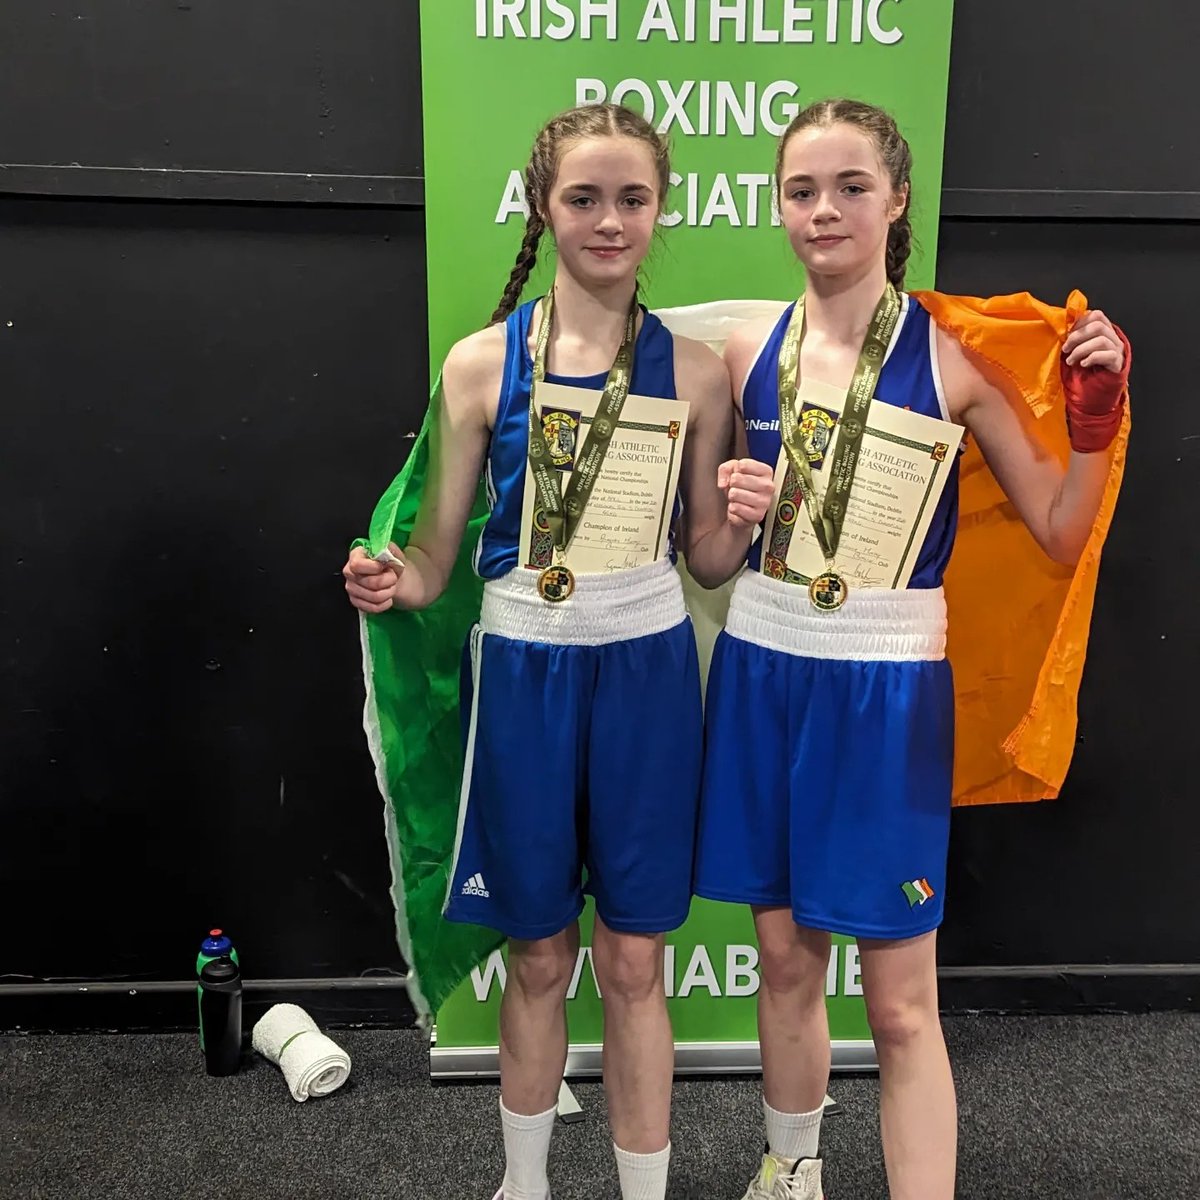 Congratulations to our two newly Crowned All Ireland Champions 🇮🇪🏅1st years Alannah Murphy - Girl 3 45kg Champion 👏🏼🏅 Aleigha Murphy - Girl 3 47kg Champion 👏🏼🏅 Well done girls on a fantastic achievement, your hard work is paying off, you should be very proud 👏🏼 #WeAreSalle